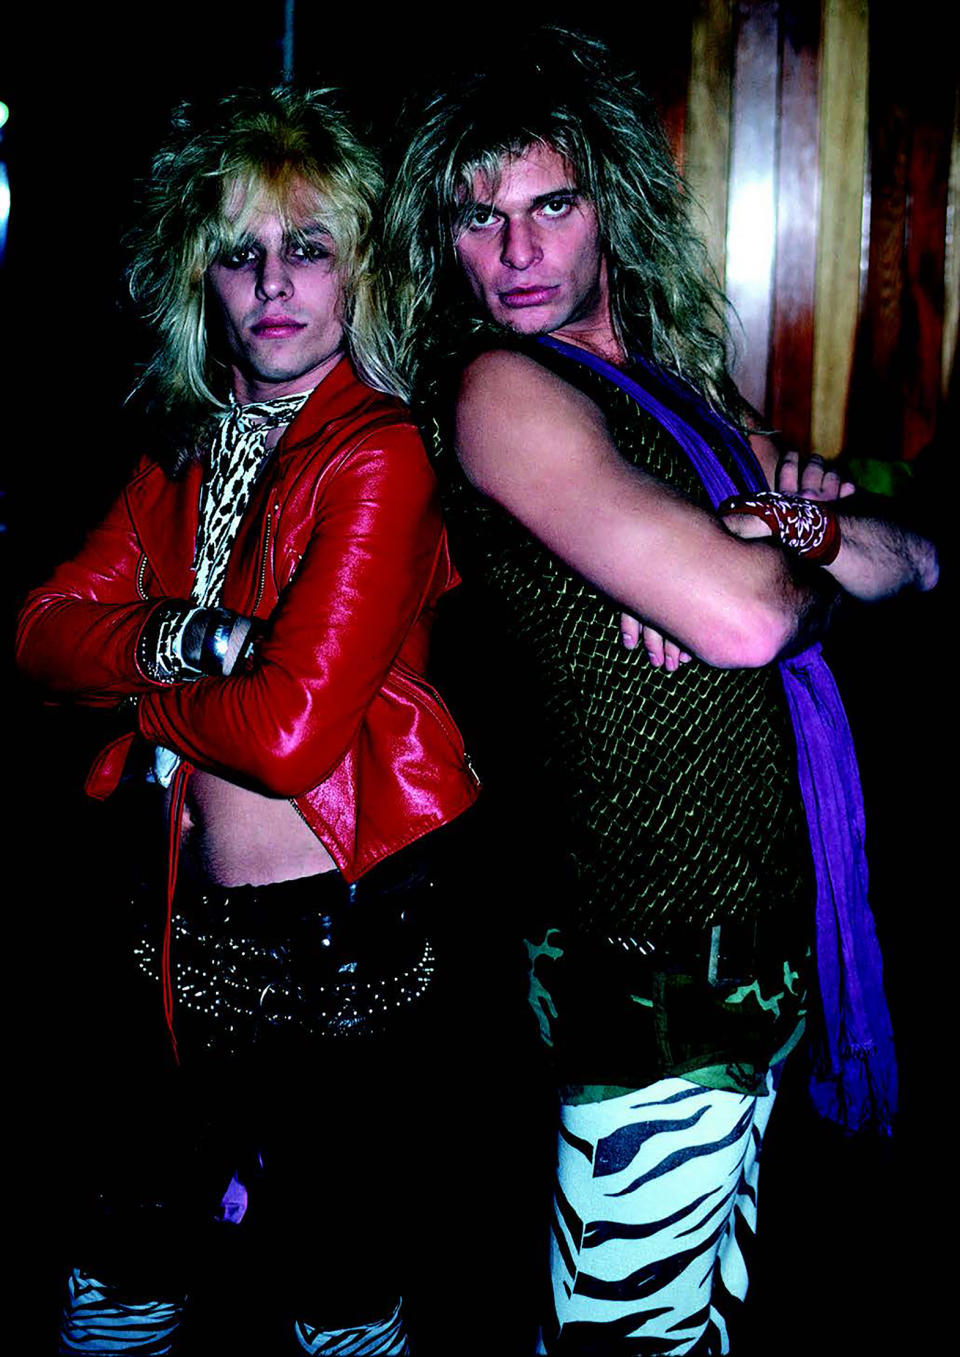 <div class="cell medium-auto caption">Vince Neil and David Lee Roth before a Mötley Crüe show in 1981.</div> <div class="cell medium-shrink medium-text-right credit"> Don Adkins</div>